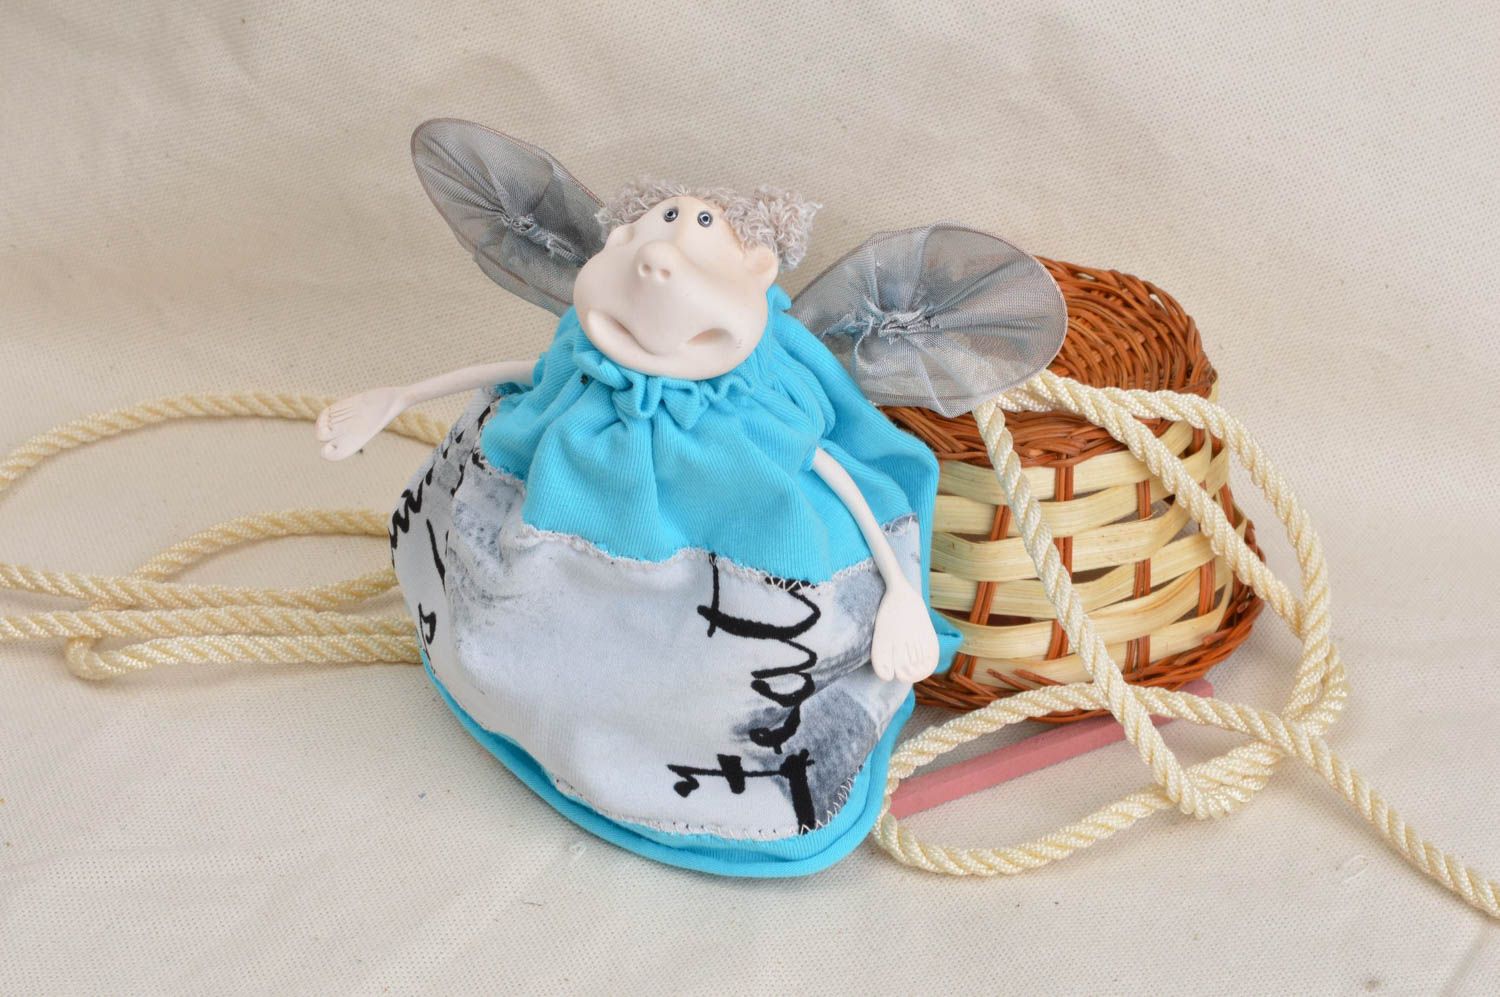 Handmade unusual cute designer decorative toy made of faience and jersey photo 1